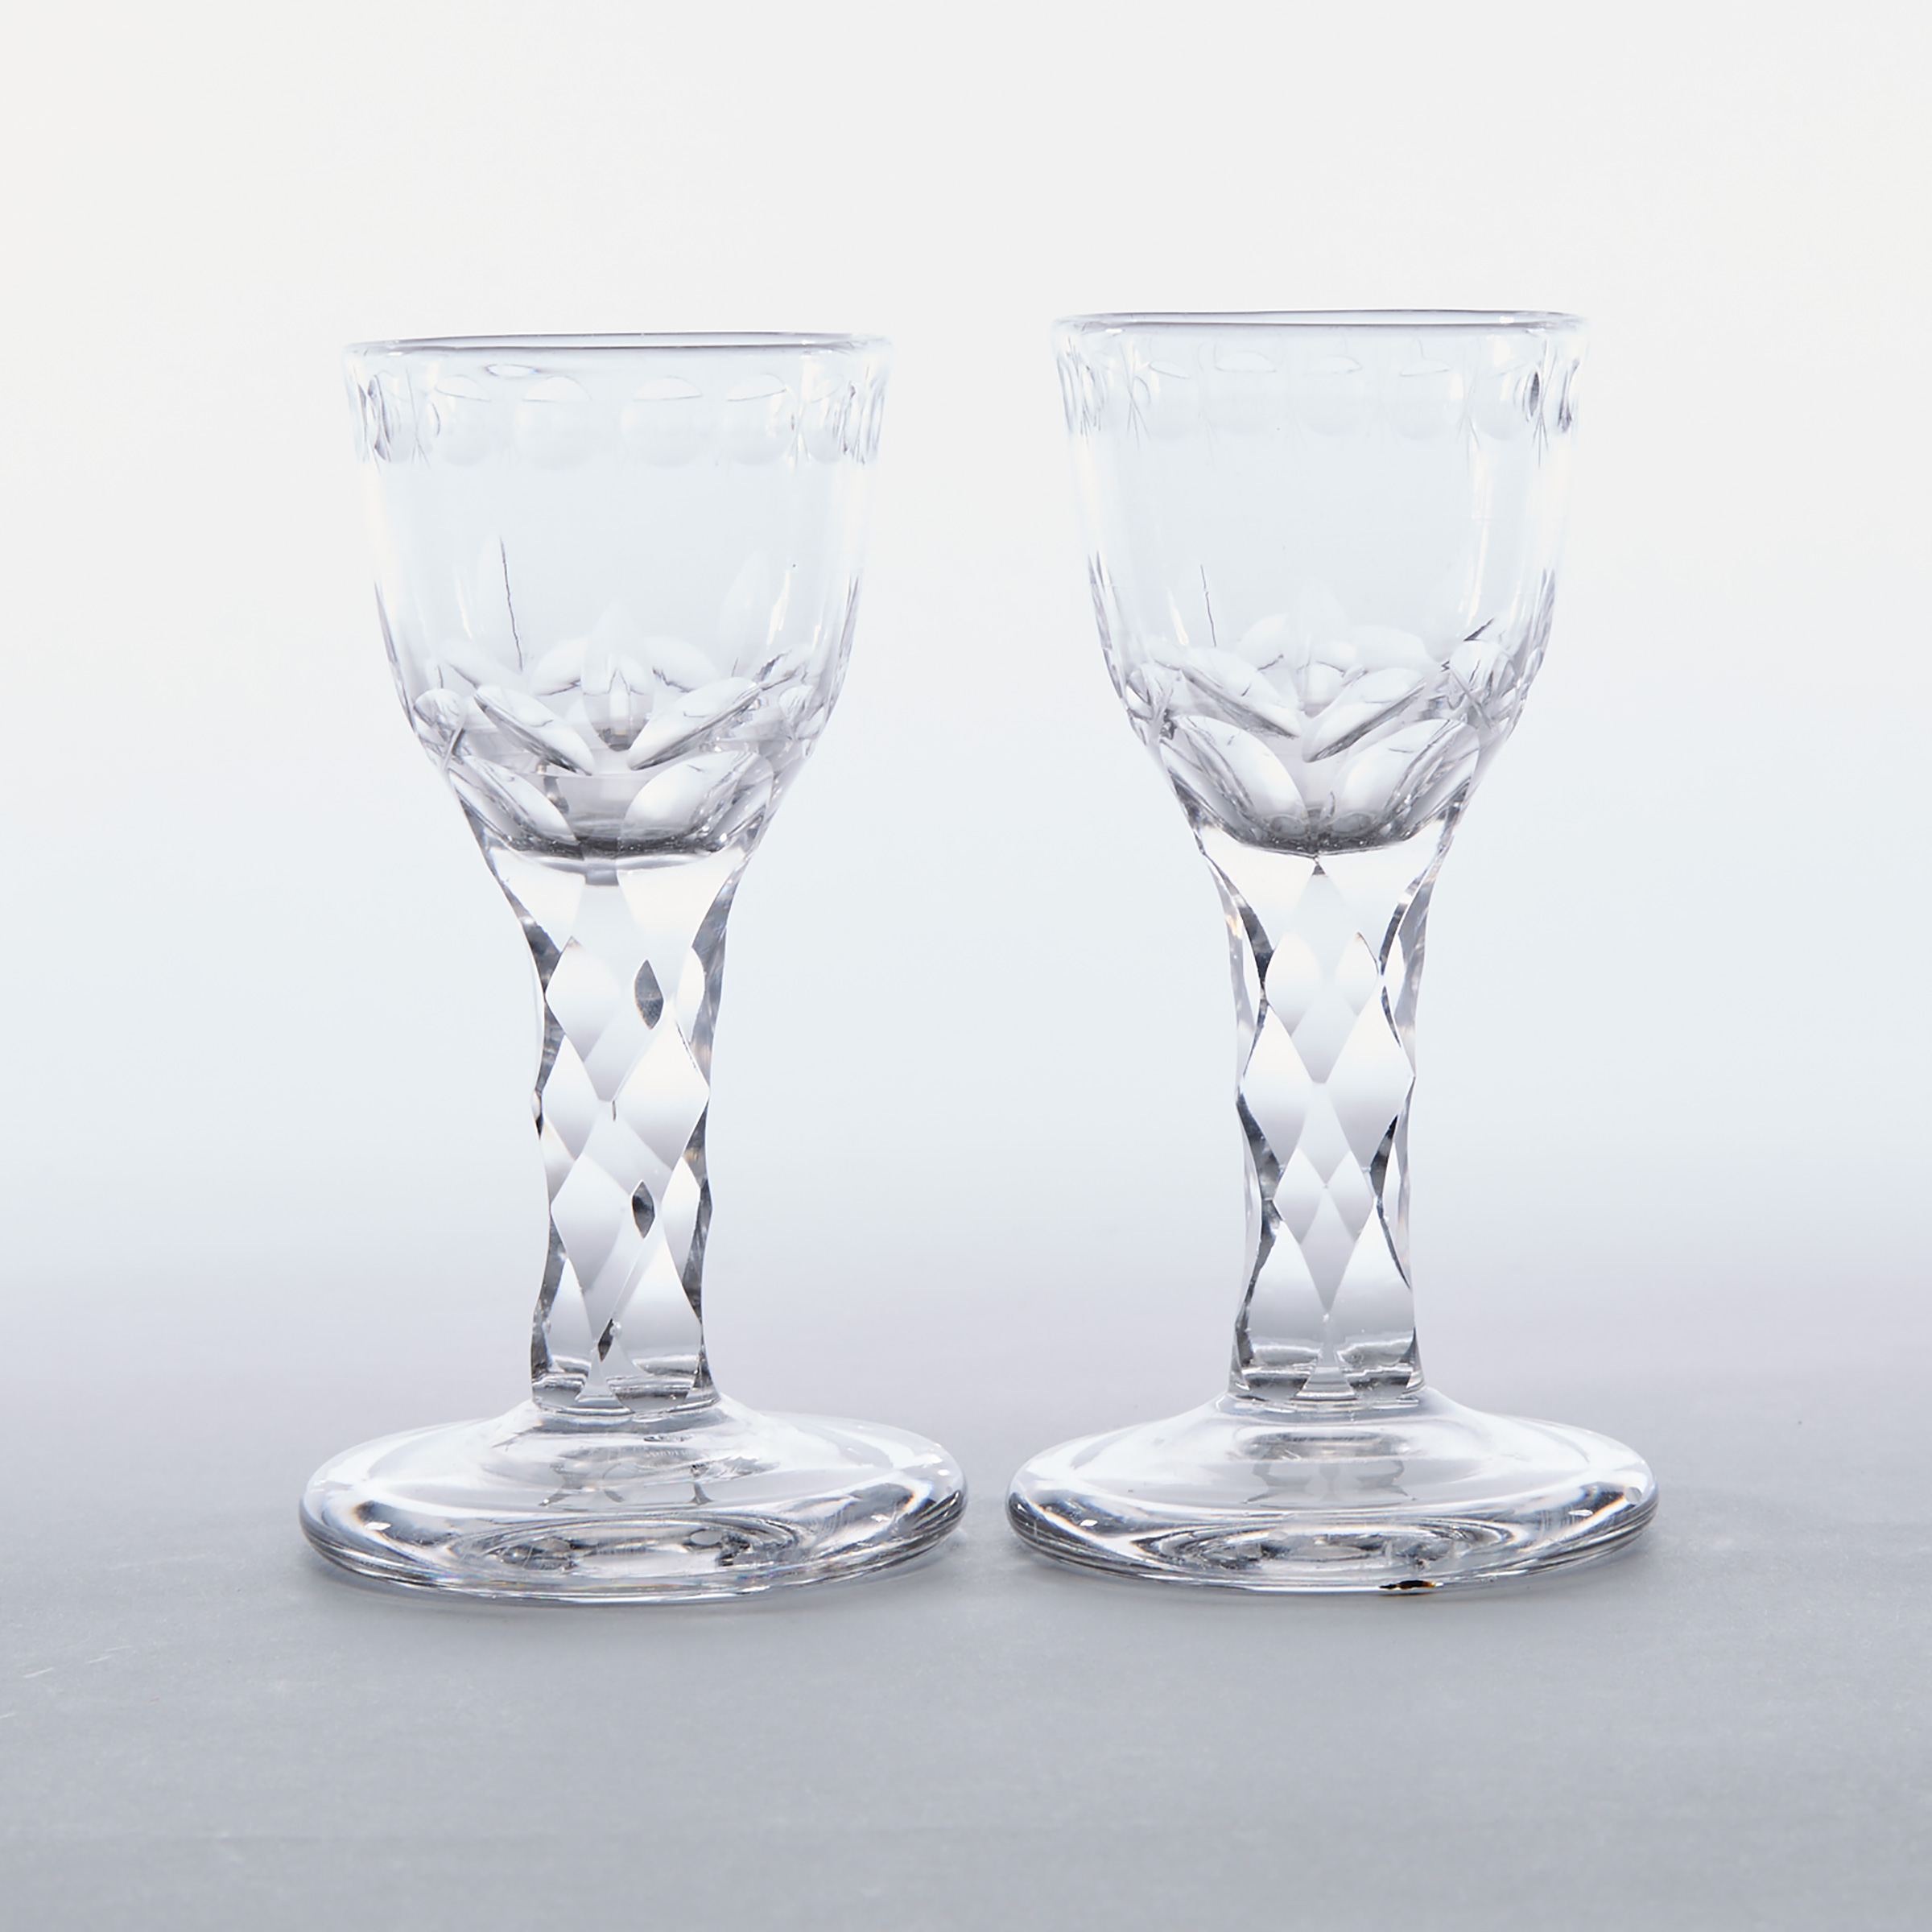 Pair of English Cut and Engraved Faceted Stemmed Dram Glasses, late 18th century